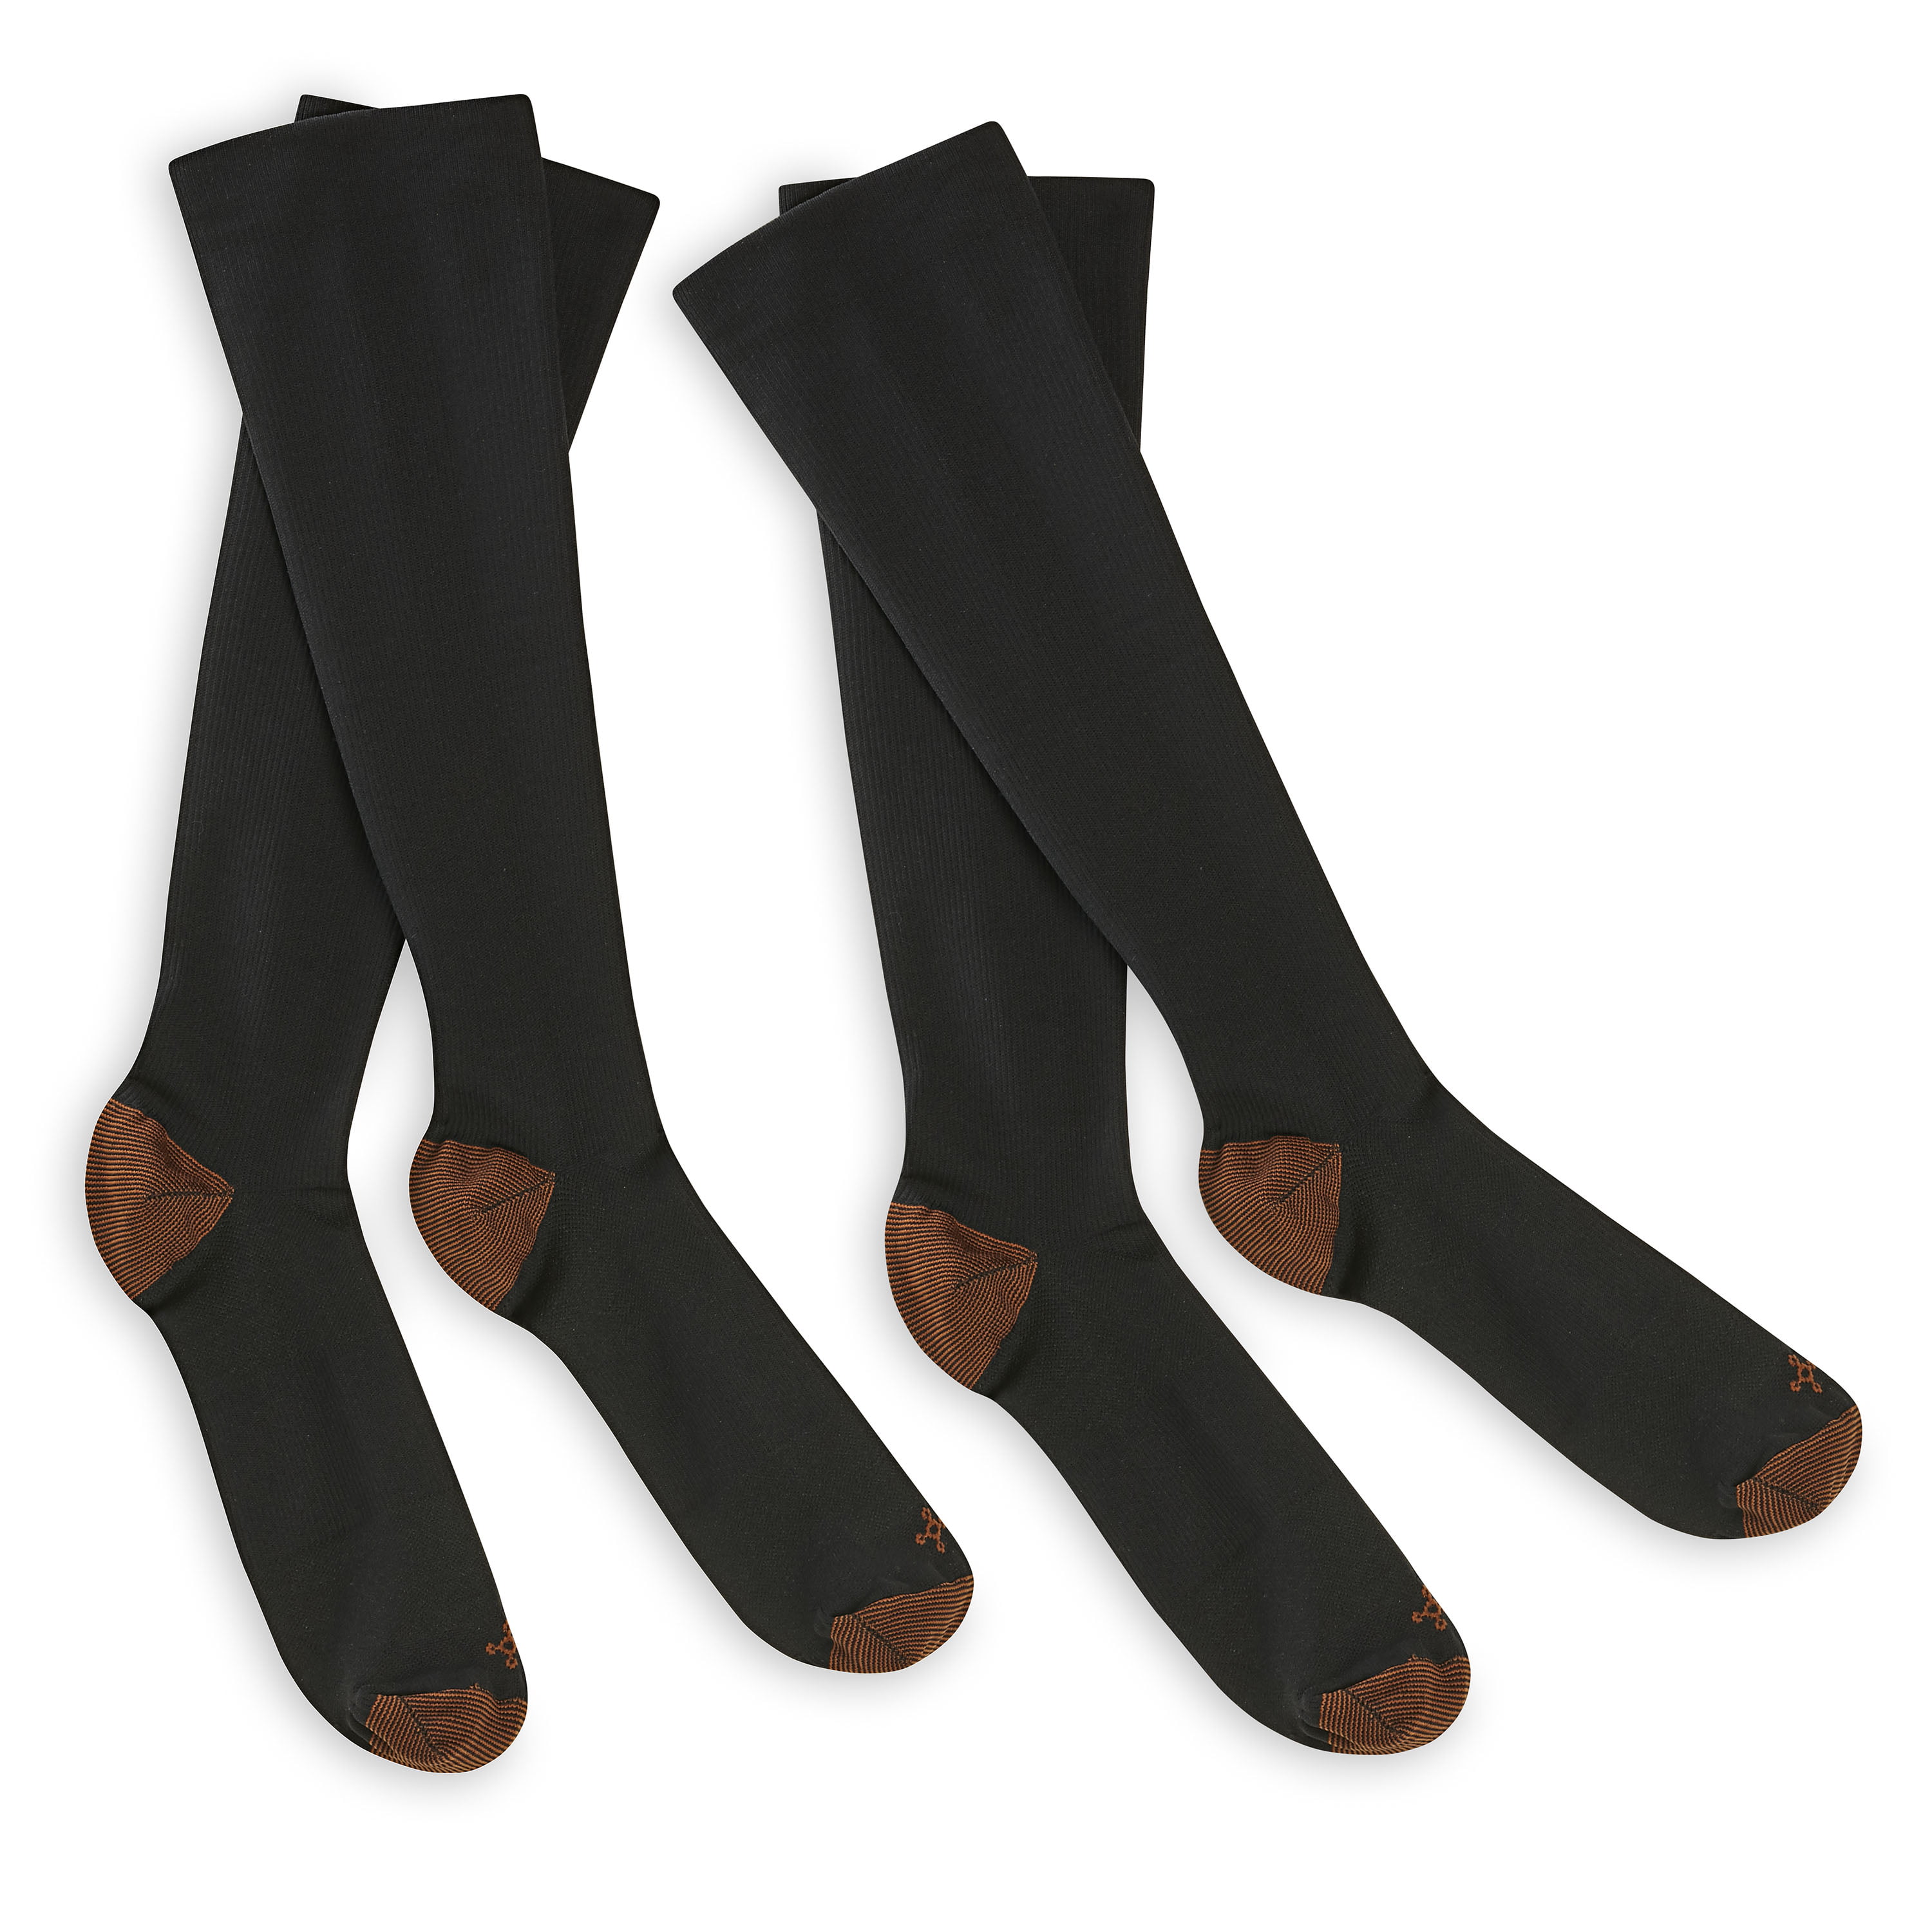 Tommie Copper Sport Compression Knee 